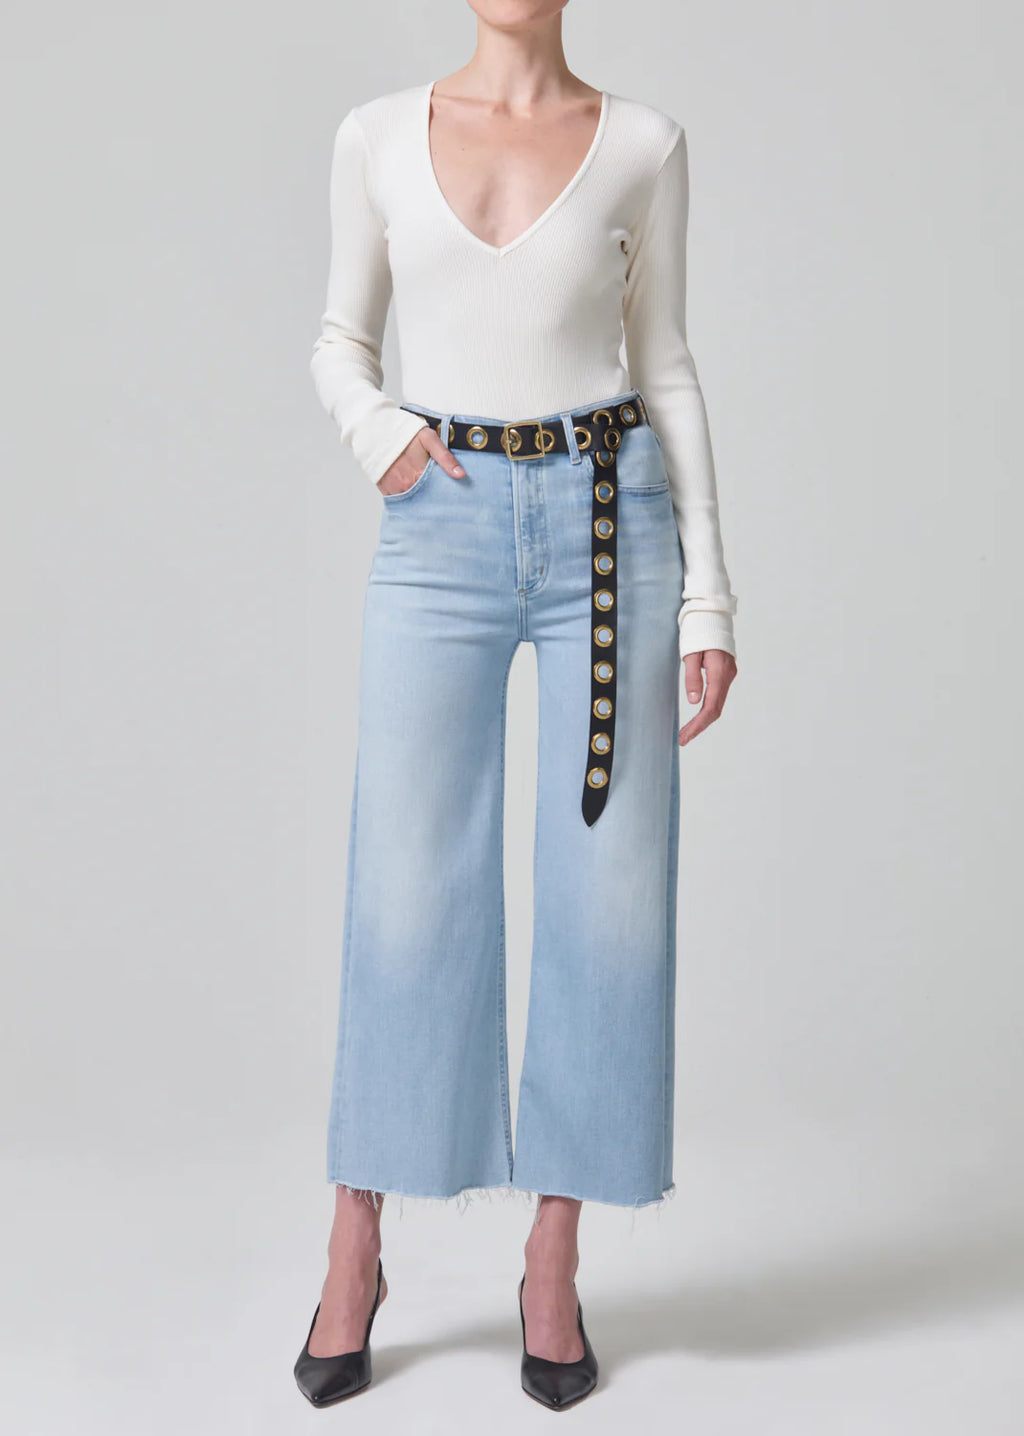 Lyra Crop Jean in Marquee